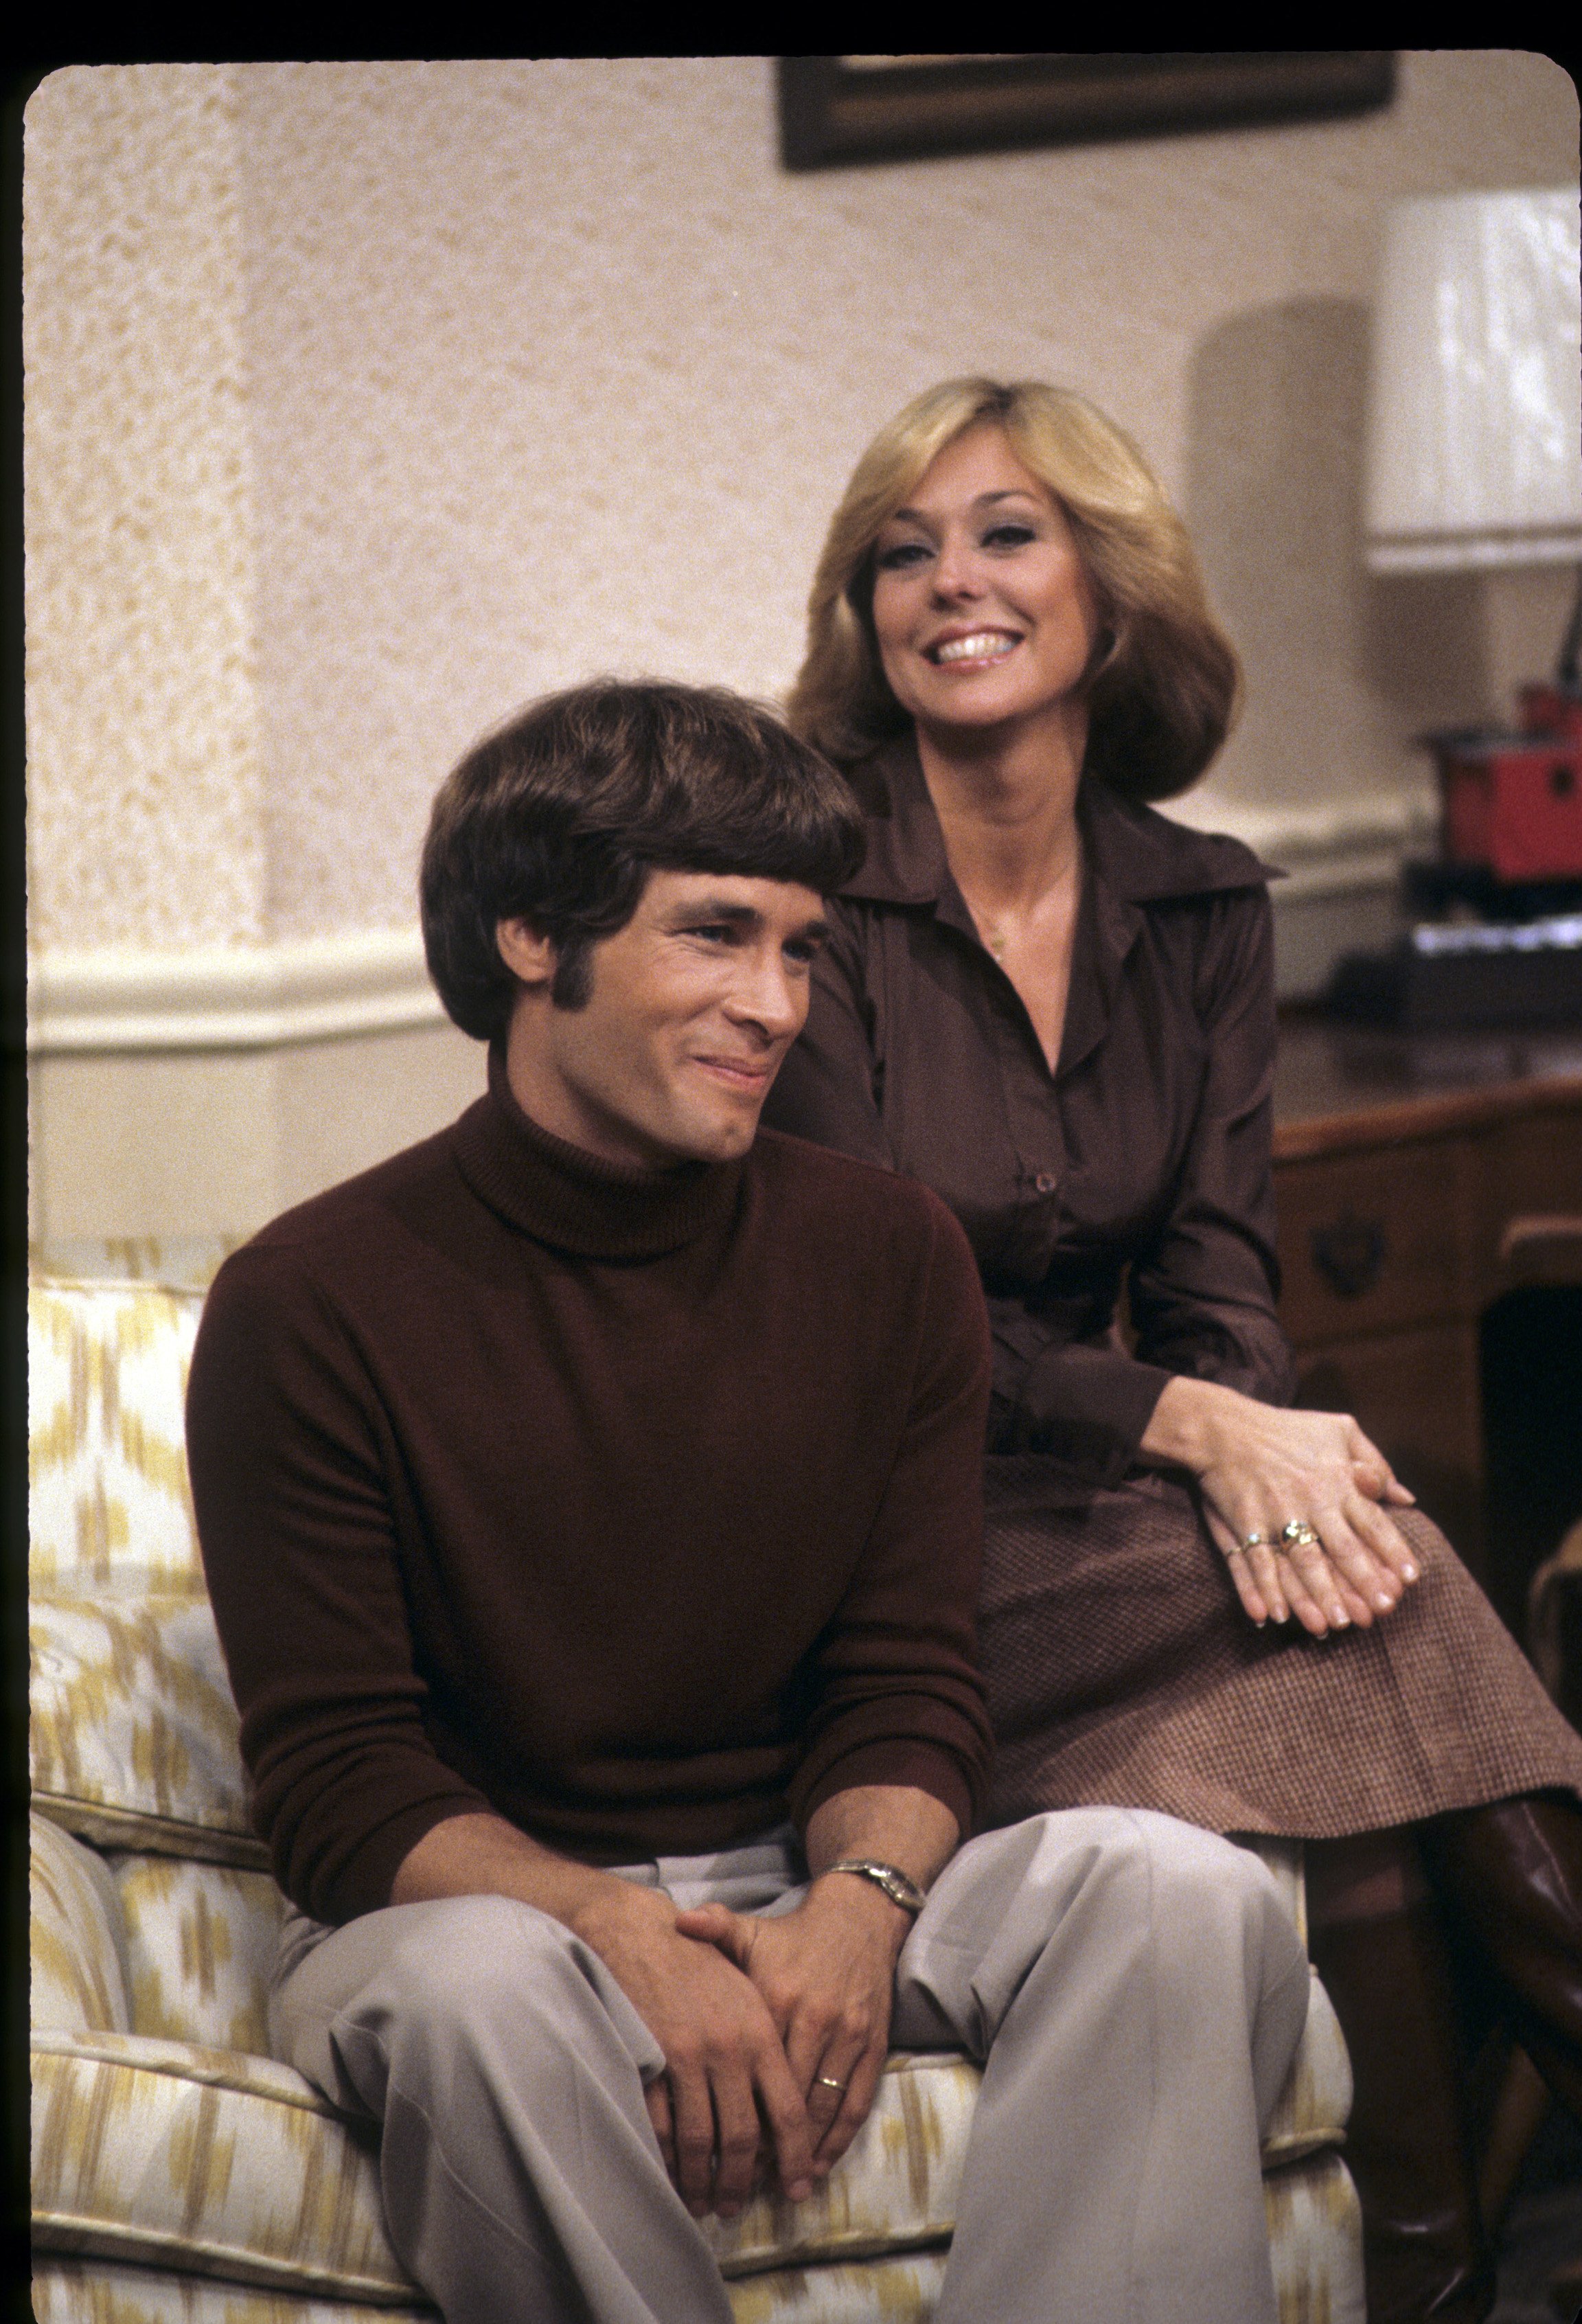 Tina Cole and Don Grady on the Thanksgiving episode of "My Three Sons" on November 25, 1977 | Source: Getty Images